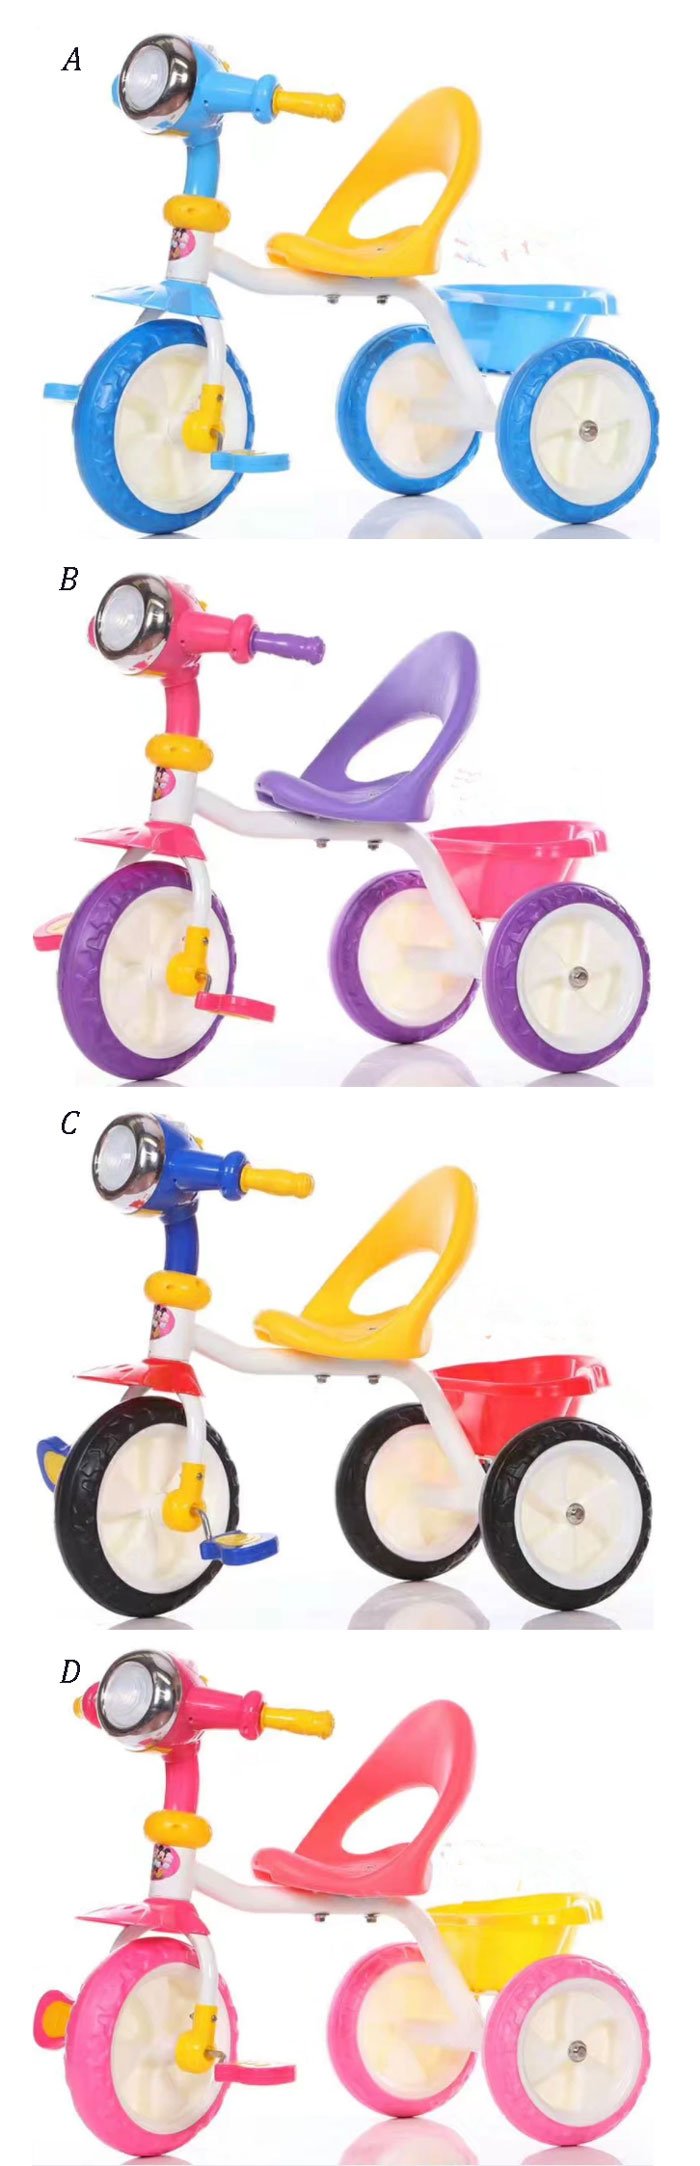 High Quality Tricycle For kids 986